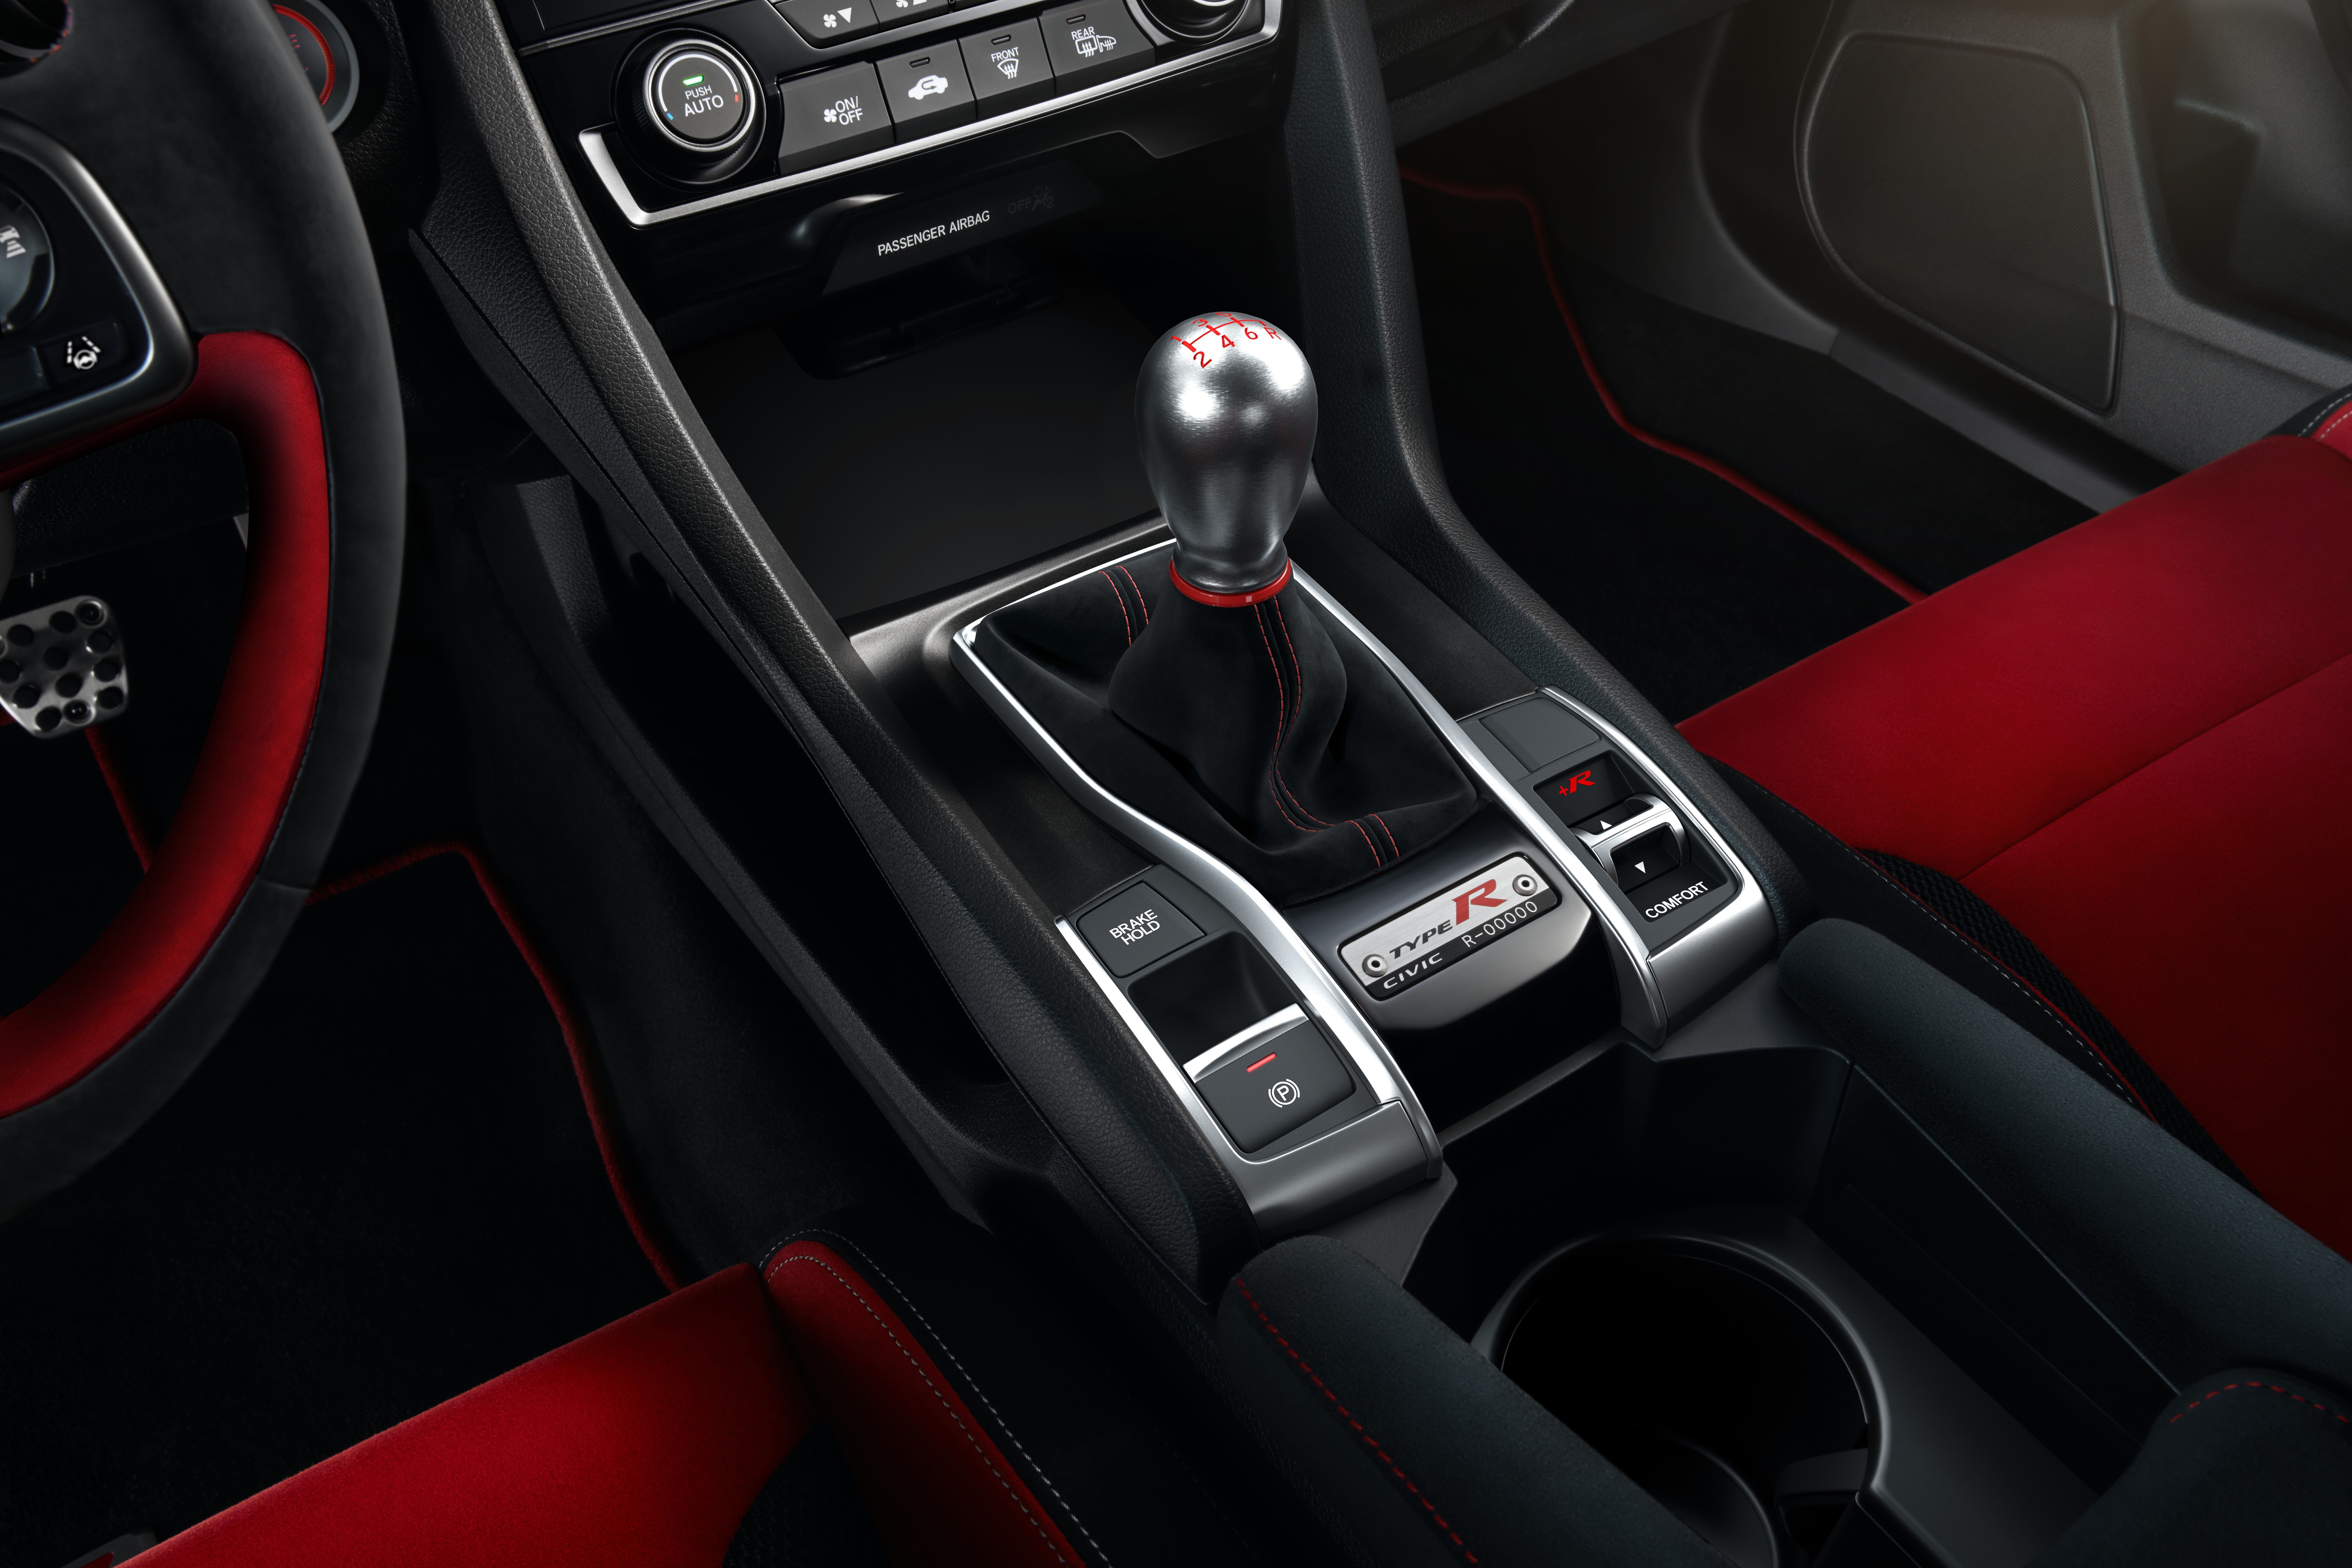 Civic Type R shifter.